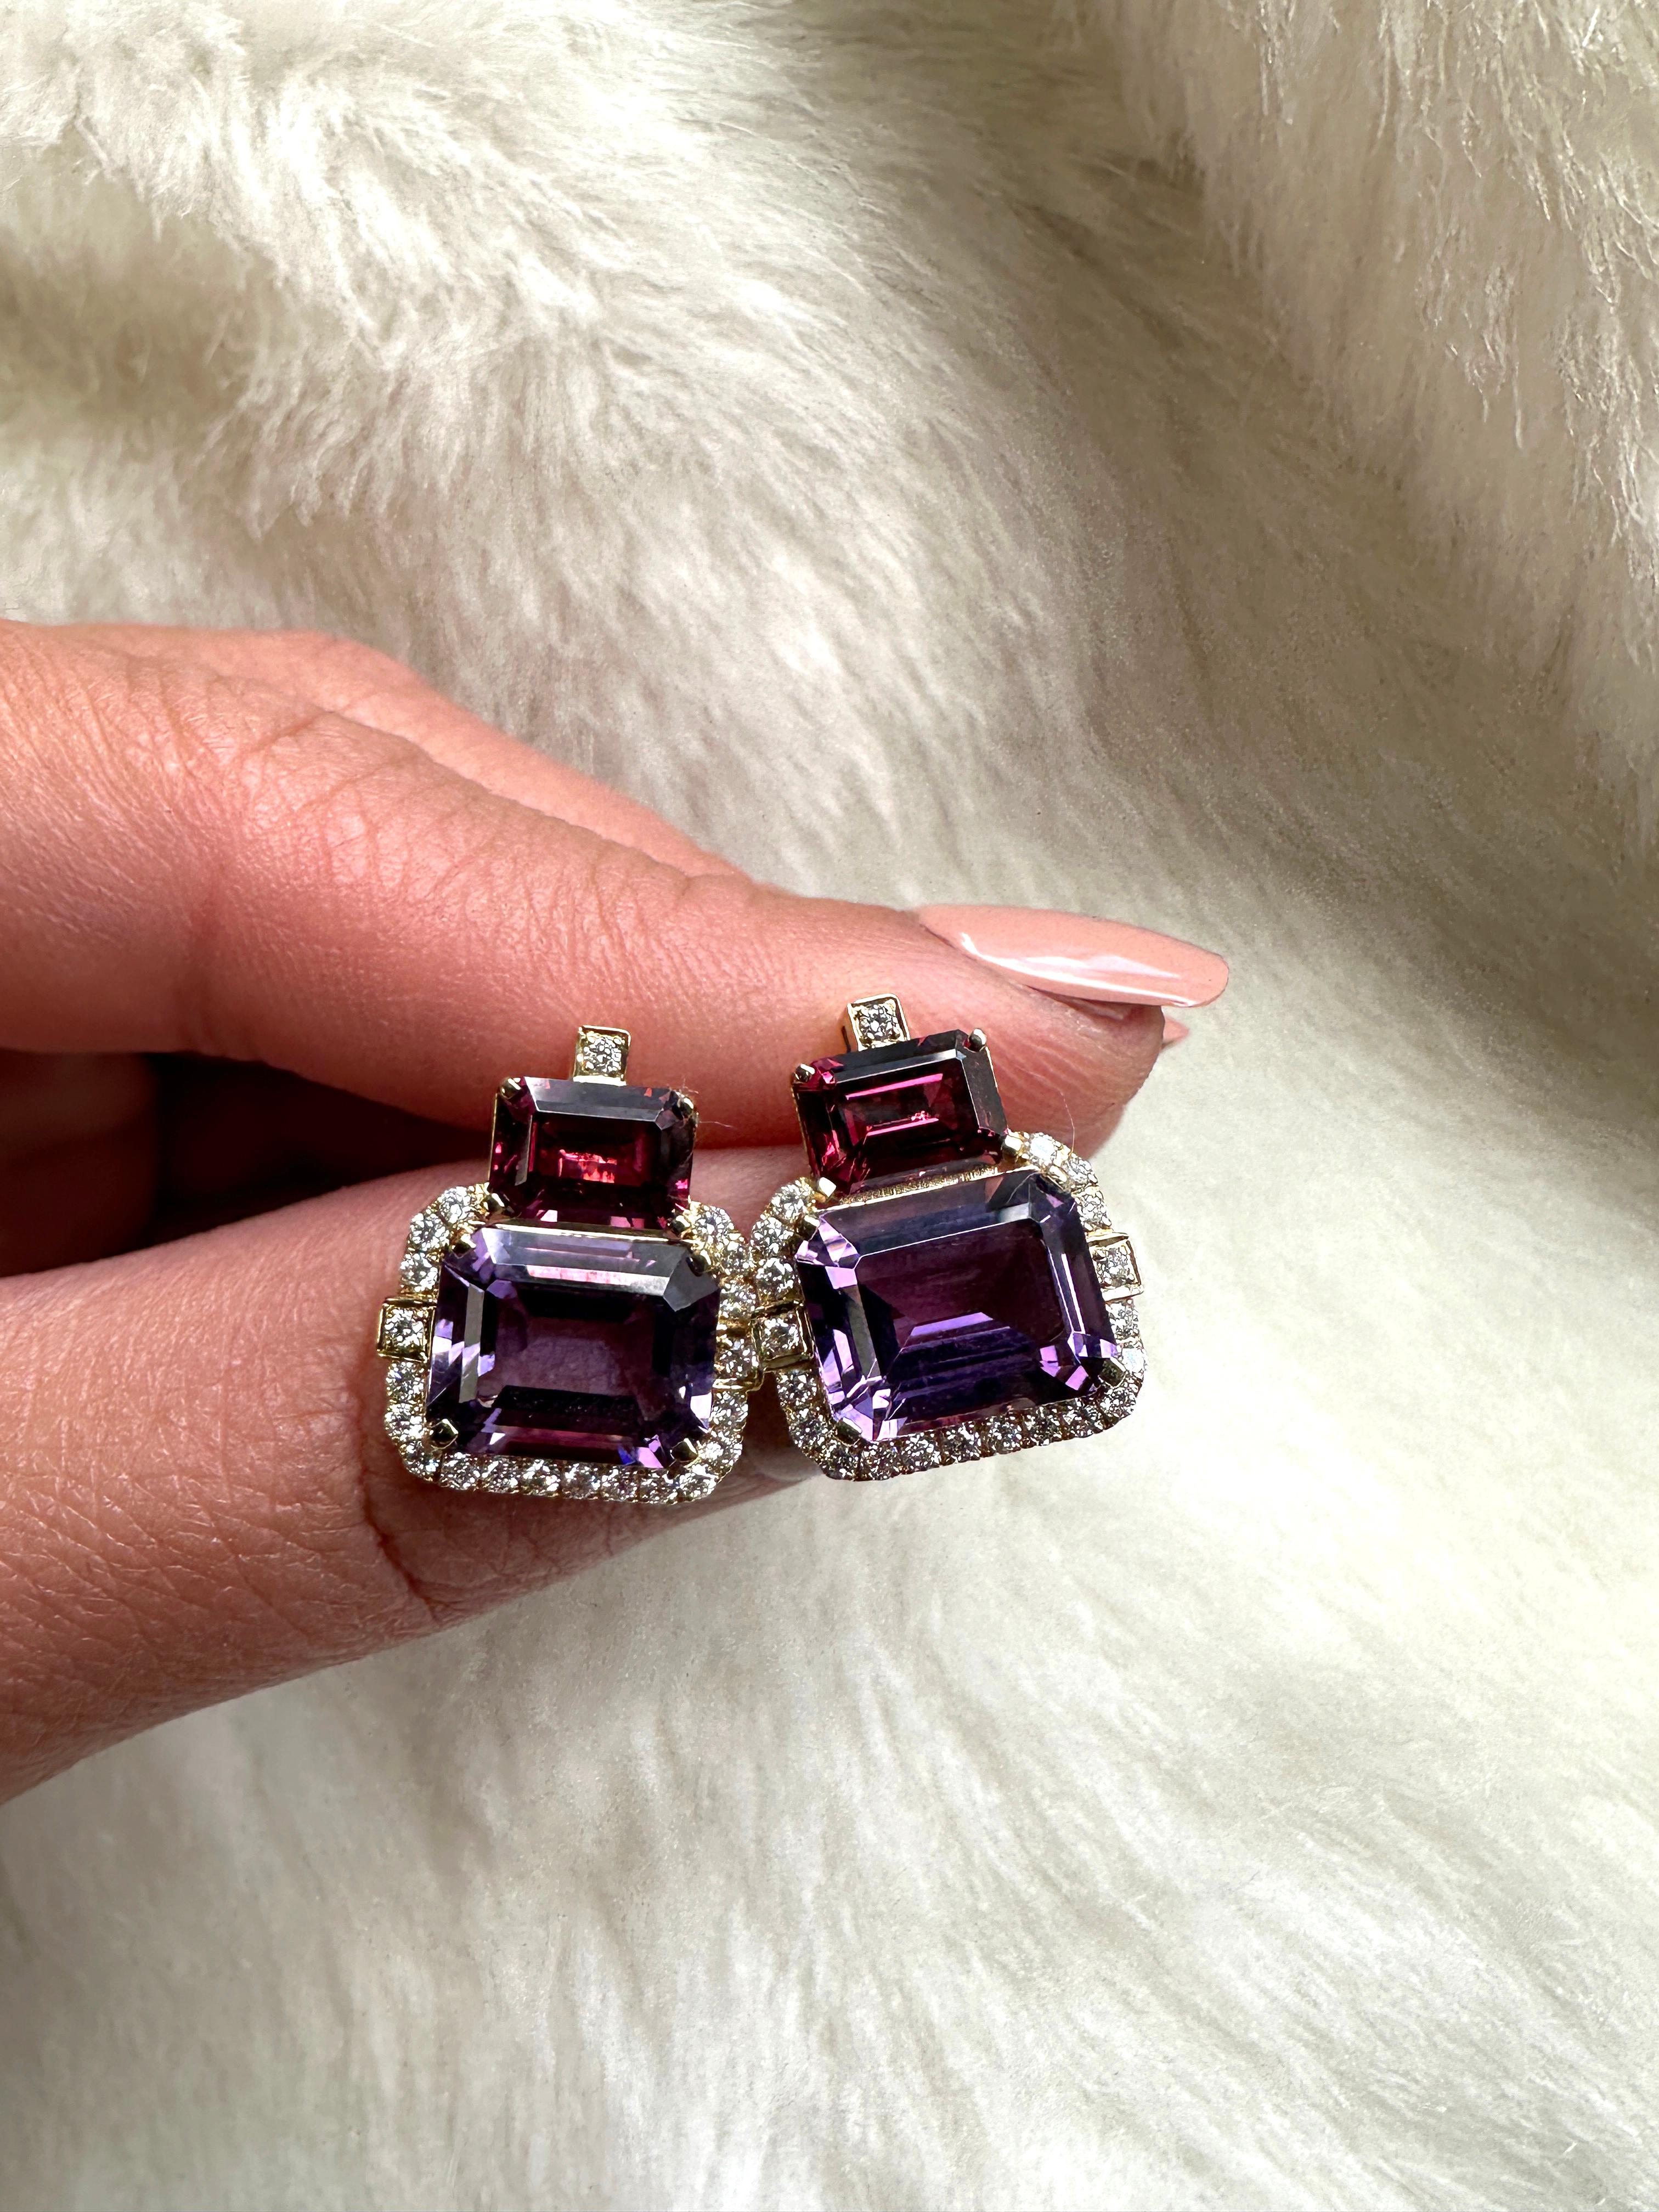 Introducing the captivating 2 Stone Amethyst and Garnet Emerald Cut Earrings with Diamonds in 18K Yellow Gold, a remarkable creation from the exquisite 'Gossip' Collection. Crafted with meticulous attention to detail, these earrings embody elegance